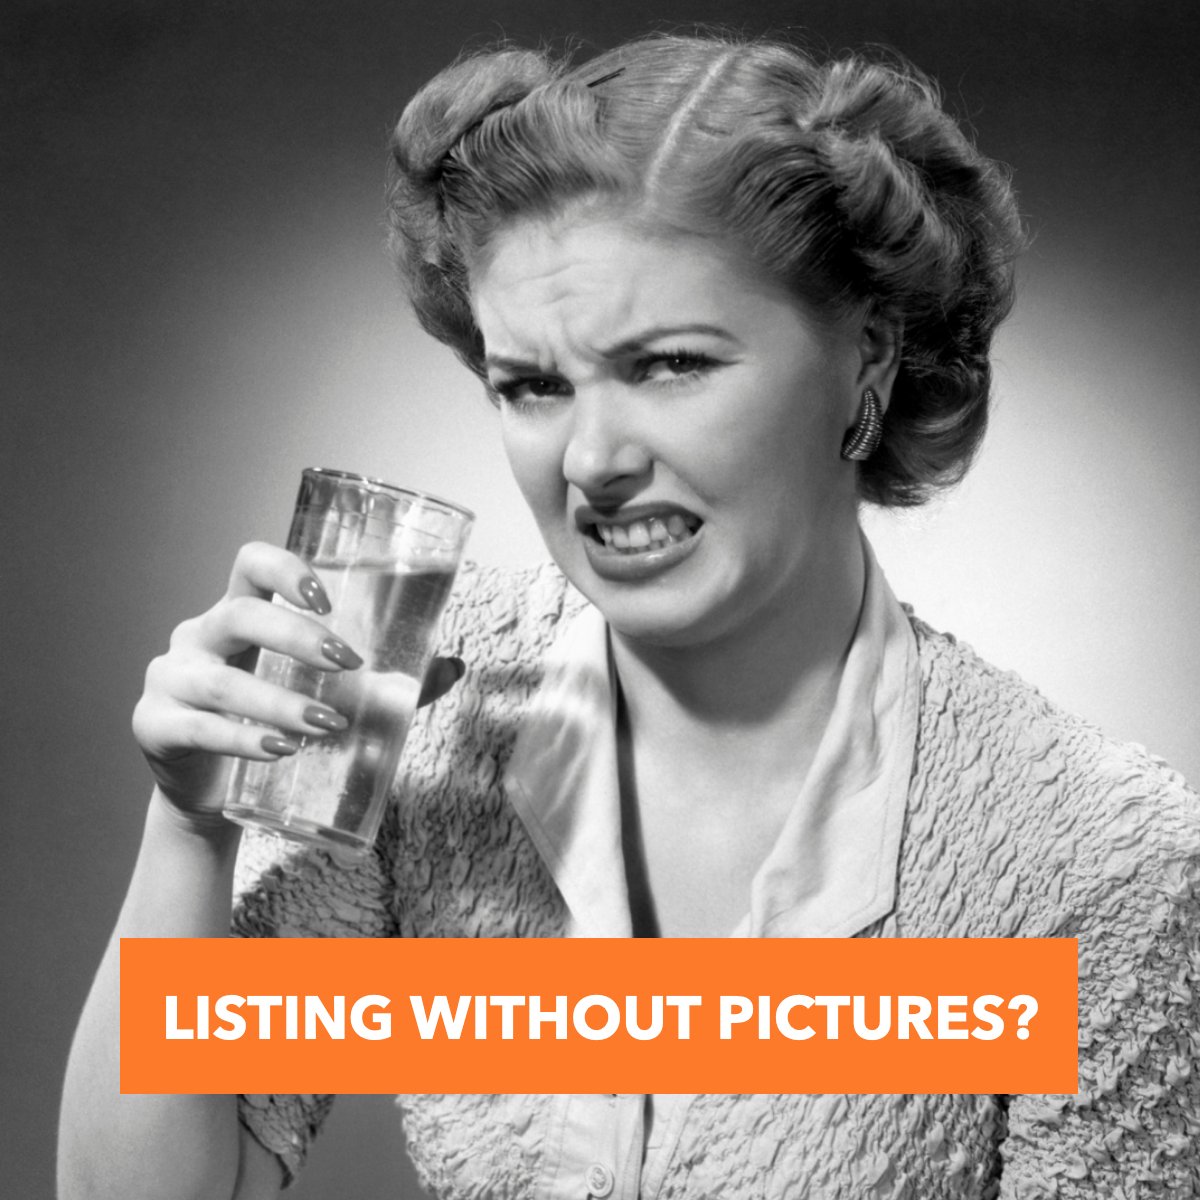 Listing with no pictures? 😱

YIKES. 

#listing    #listings    #pictures    #housepictures    #selling    #realestate    #realestatehumor    #realestatememe
#HomeForSale #SimiValleyHOmes #ThousandOaksHOmesforSale #MoorparkHomesForSale #VenturaCountyHomeForSale